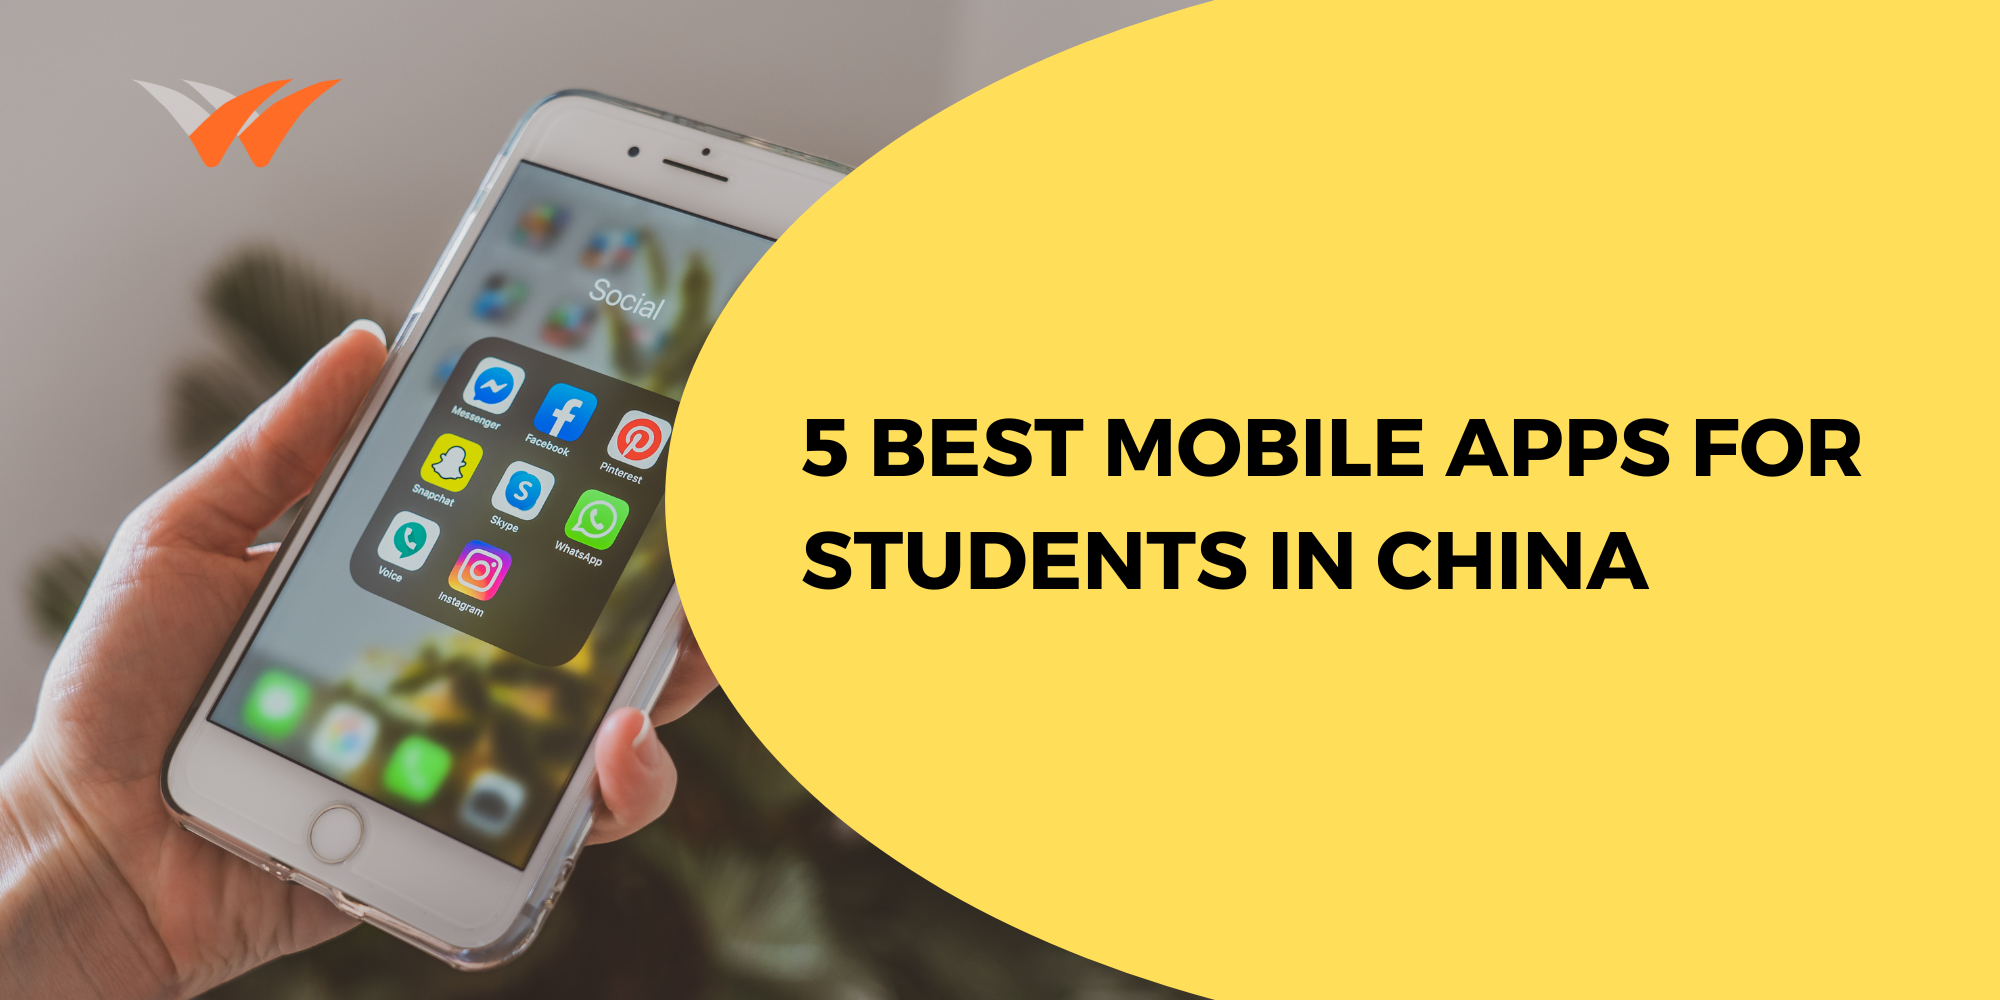 5 Best Mobile Apps for Students in China